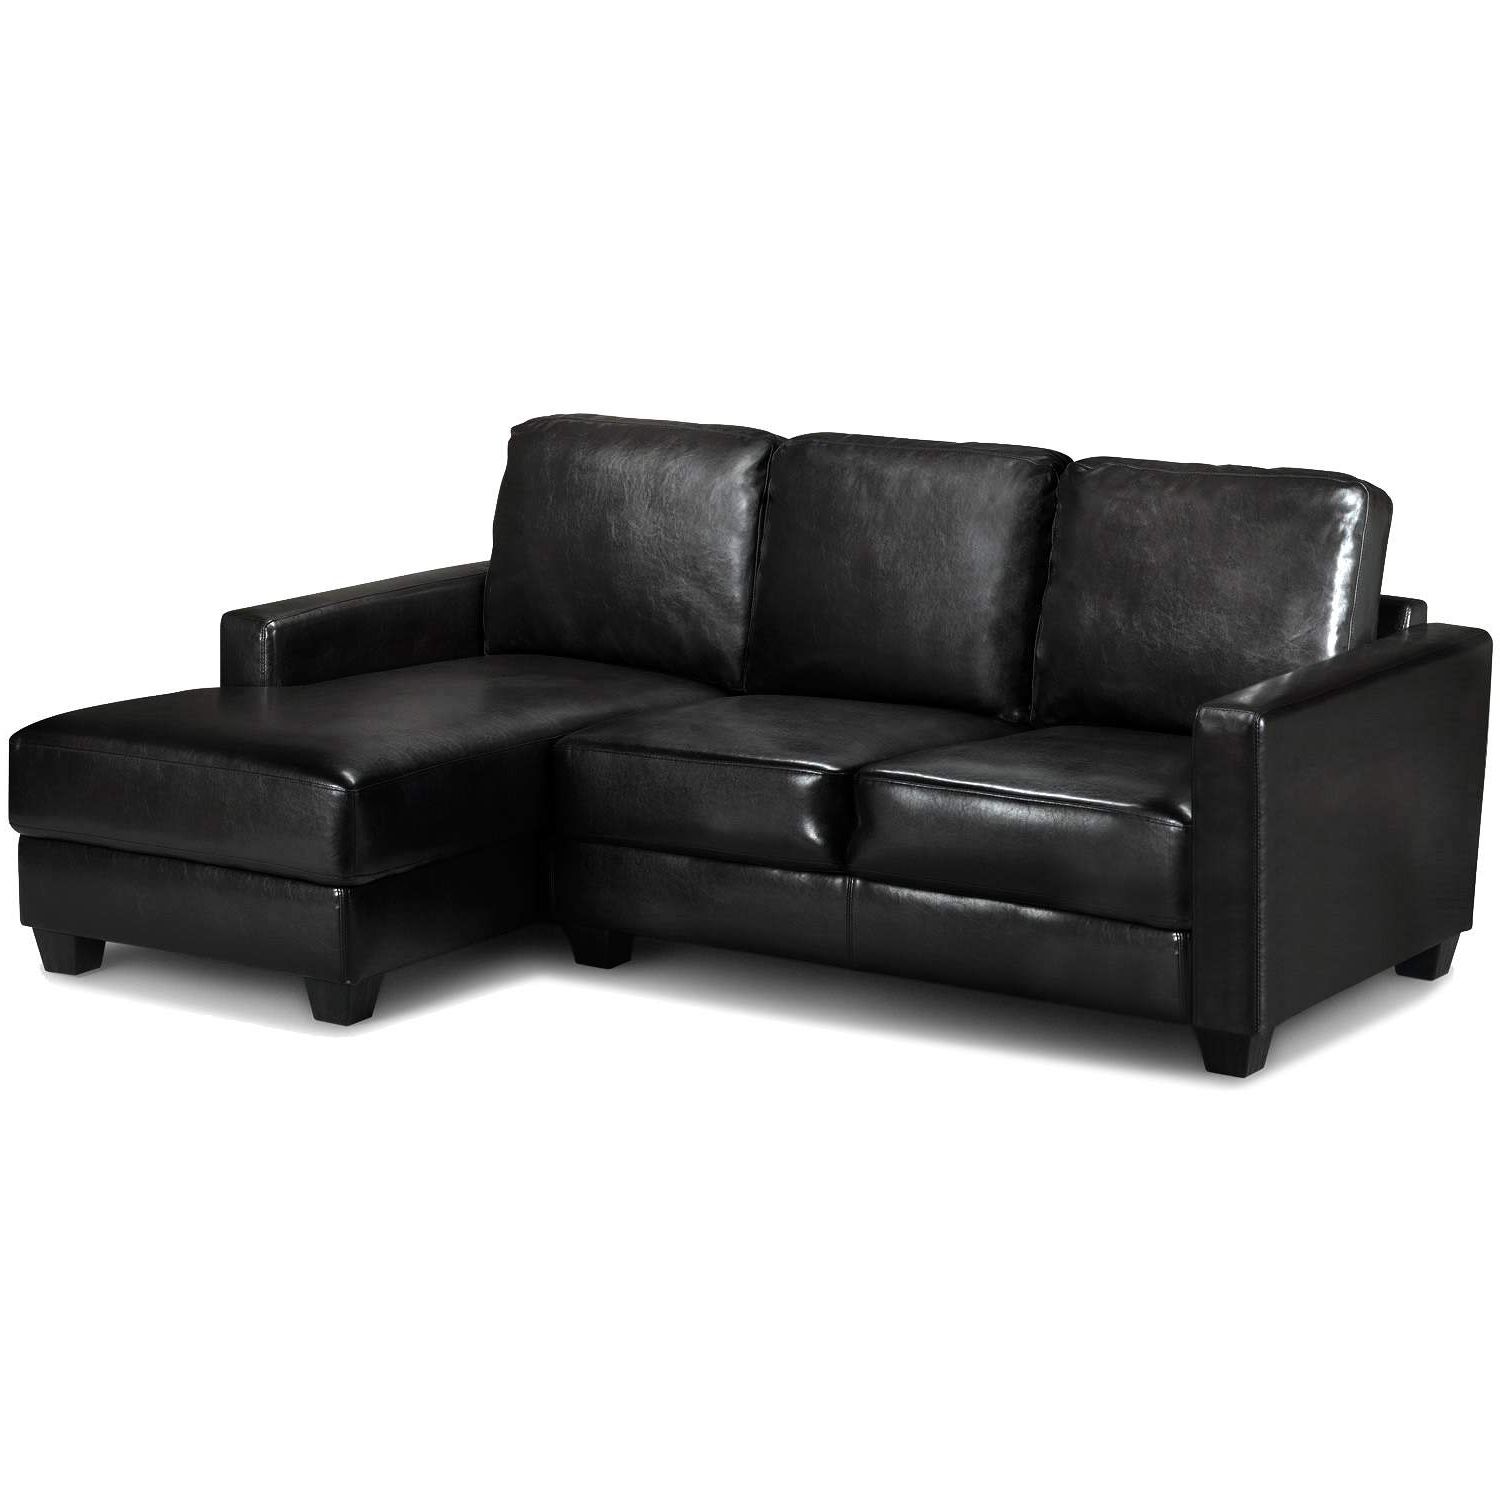 Trendy Carla Reversible Faux Leather Corner Chaise Sofa – Next Day In Leather Chaise Sofas (View 7 of 15)